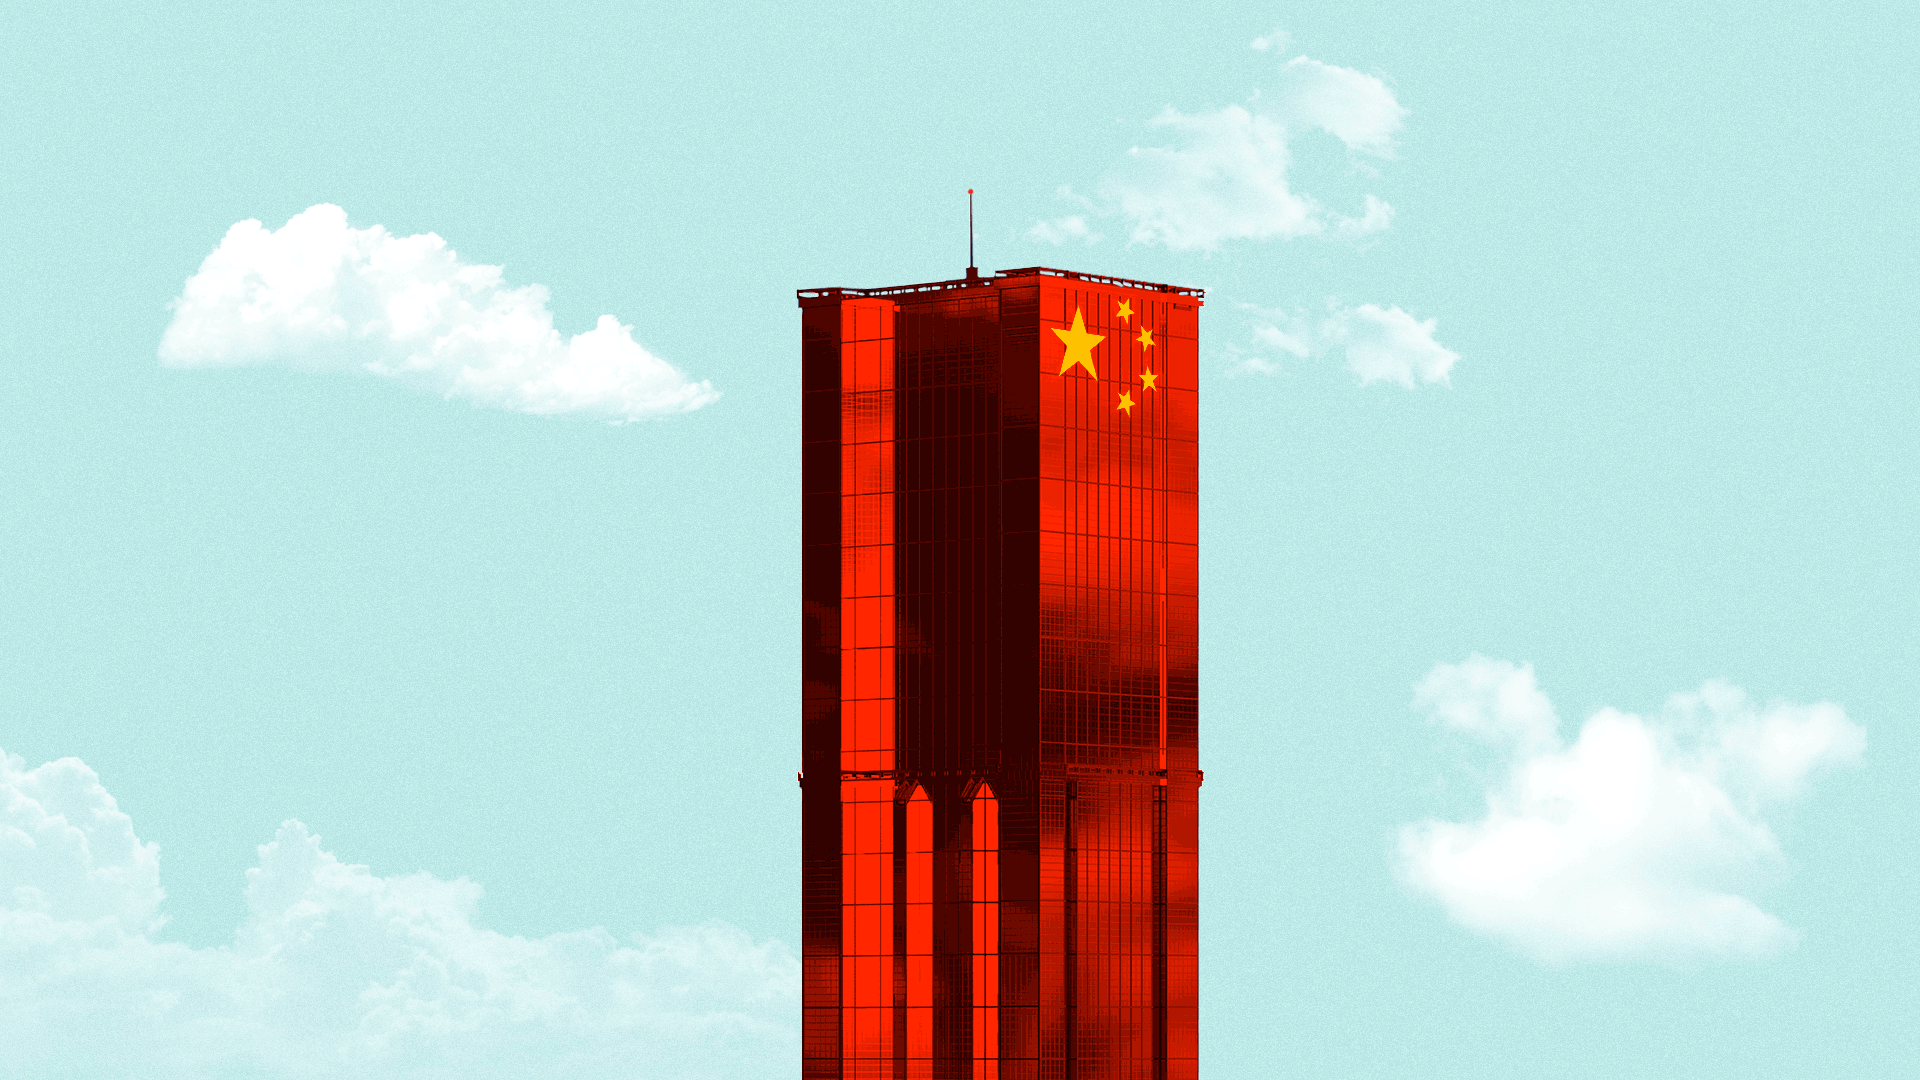 Animated illustration of a super tall skyscraper with the Chinese star elements on the side. 